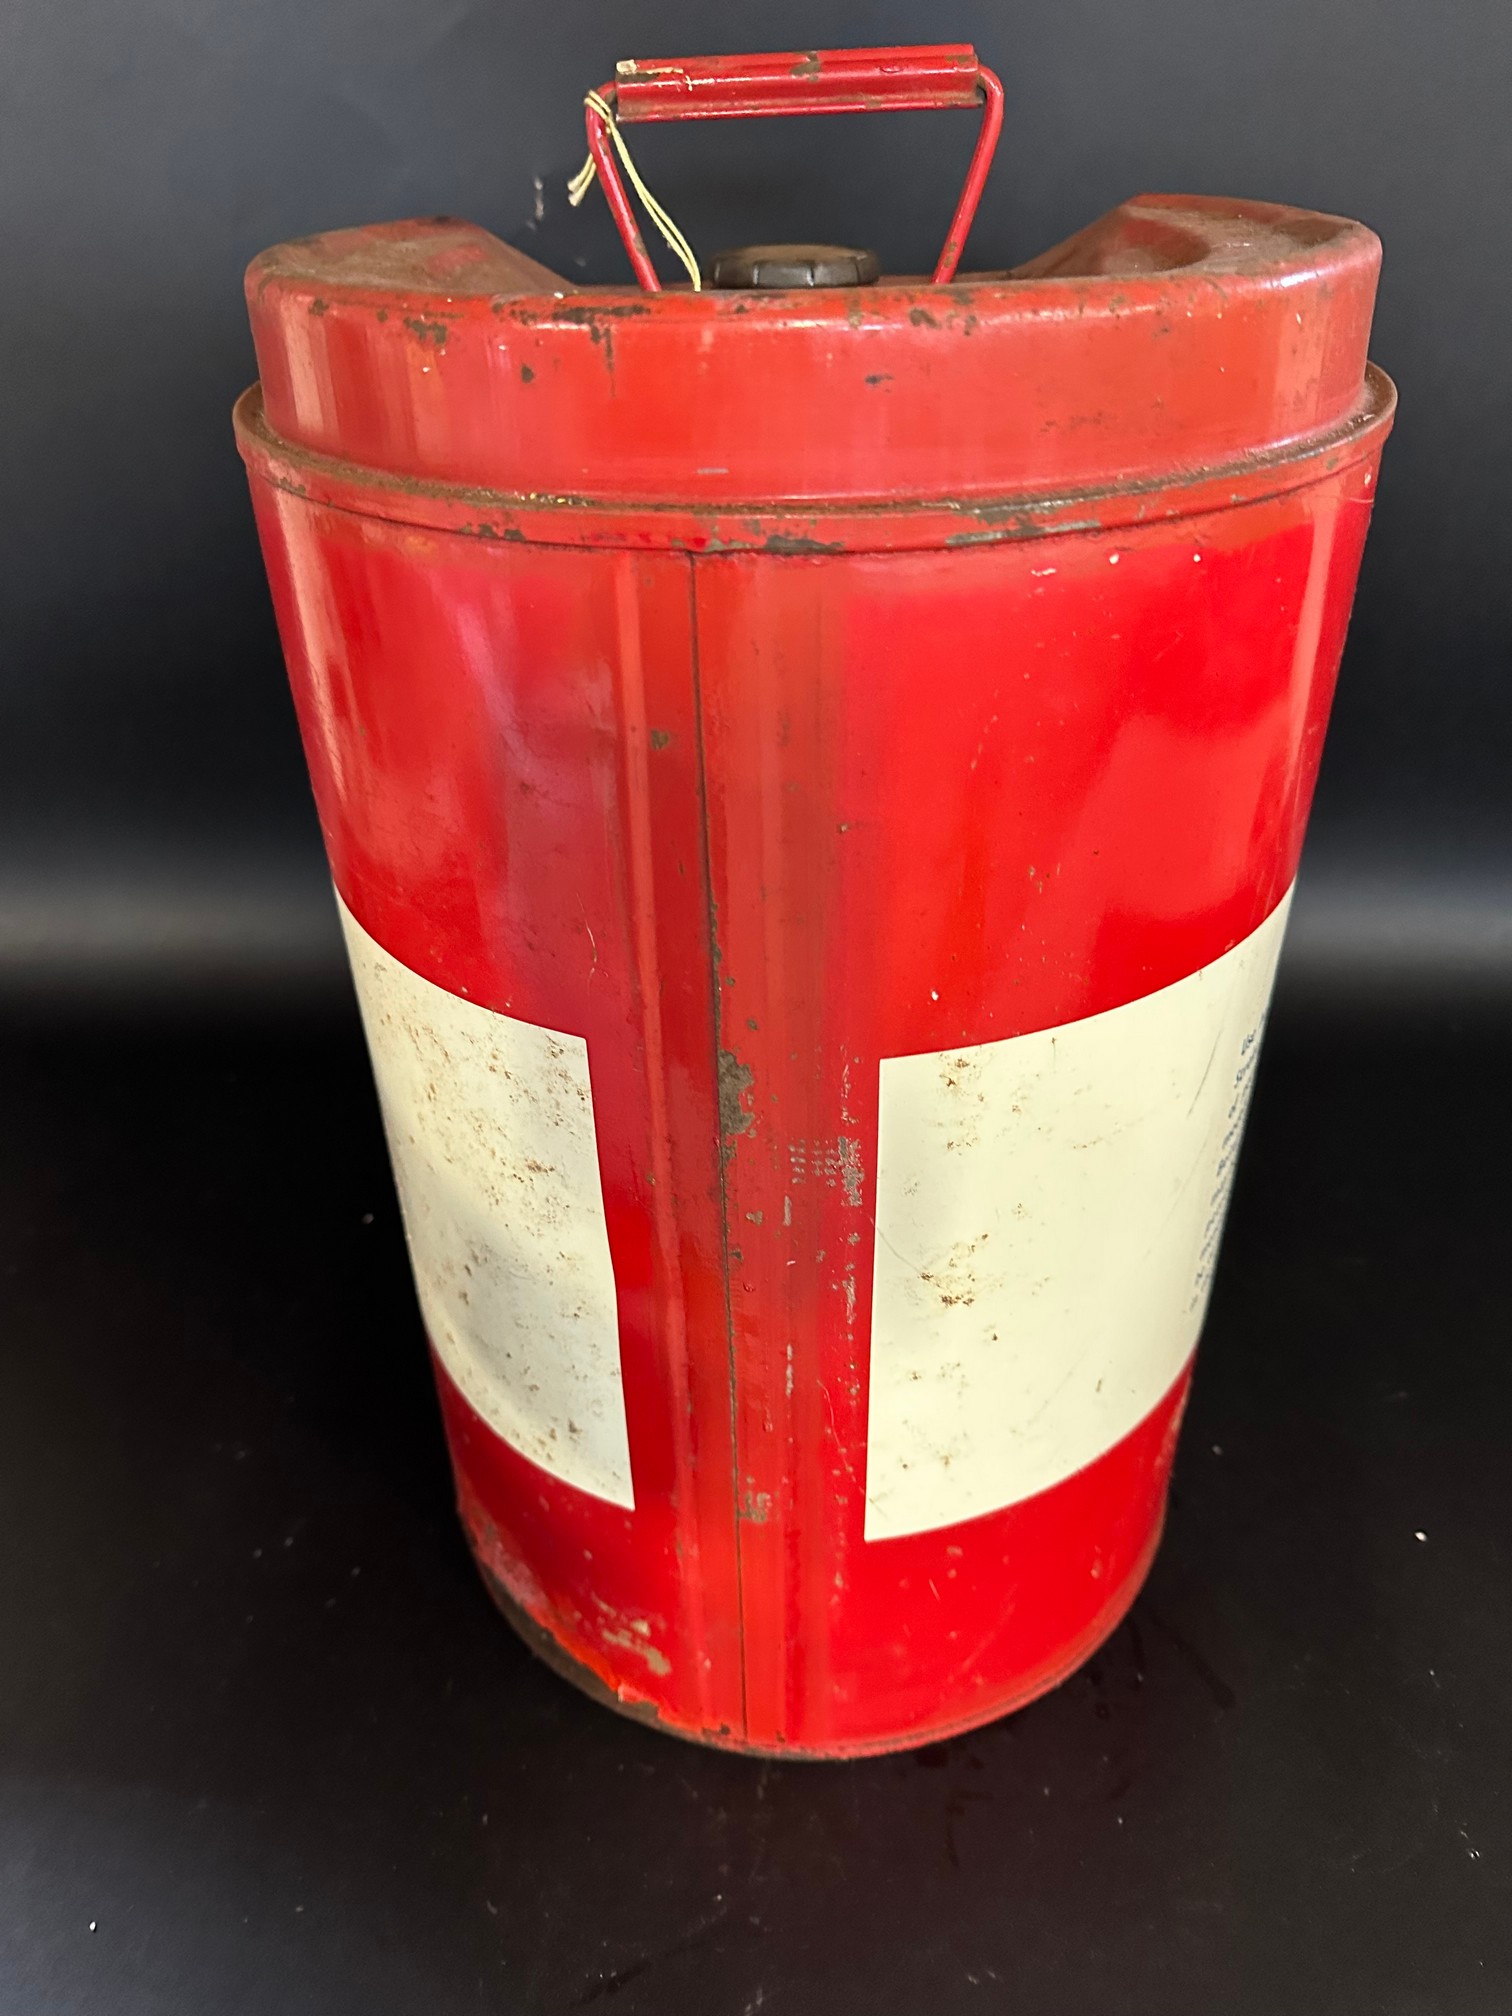 An Esso Two Stroke Motor Oil five gallon drum in very good condition. - Image 3 of 3